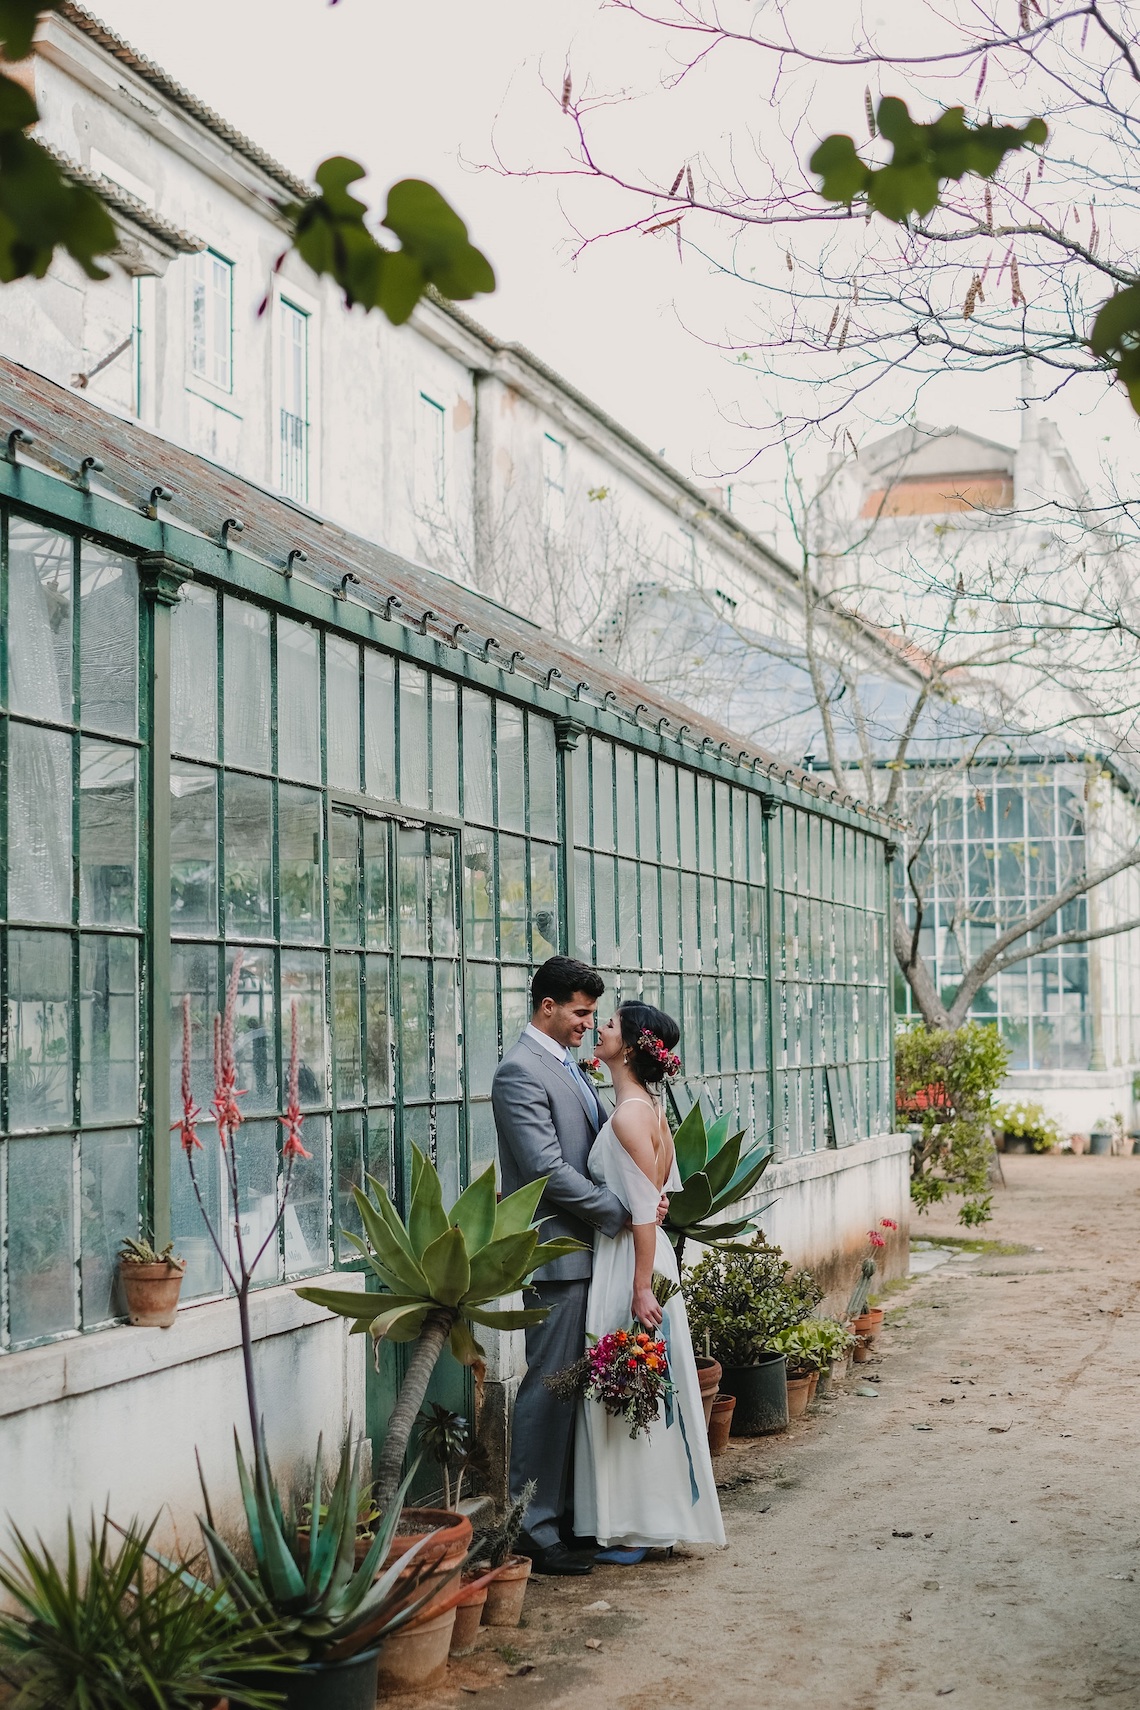 Berry and Citrus Colorful Botanical Garden Wedding Inspiration – Luisa Starling – Nulyweds 26